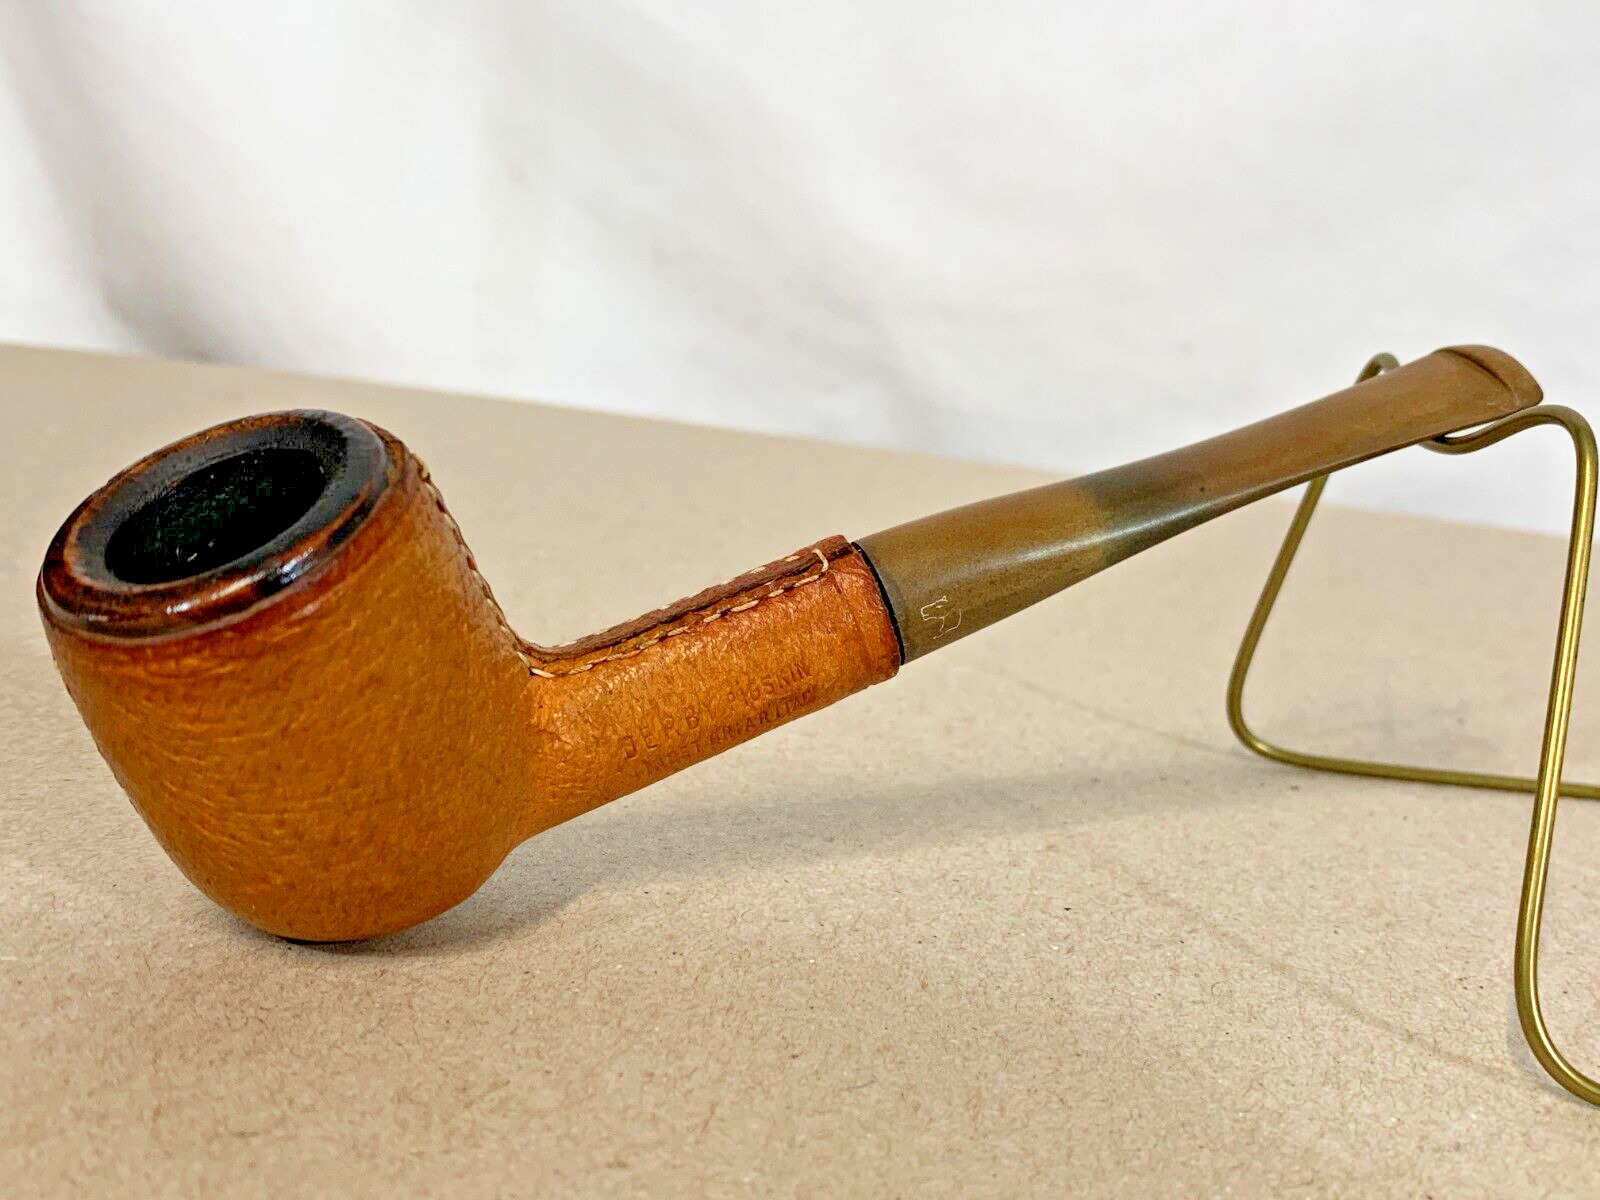 Derby Pigskin Leather Wrapped Finest Briar Italy Tobacco Smoking Pipe